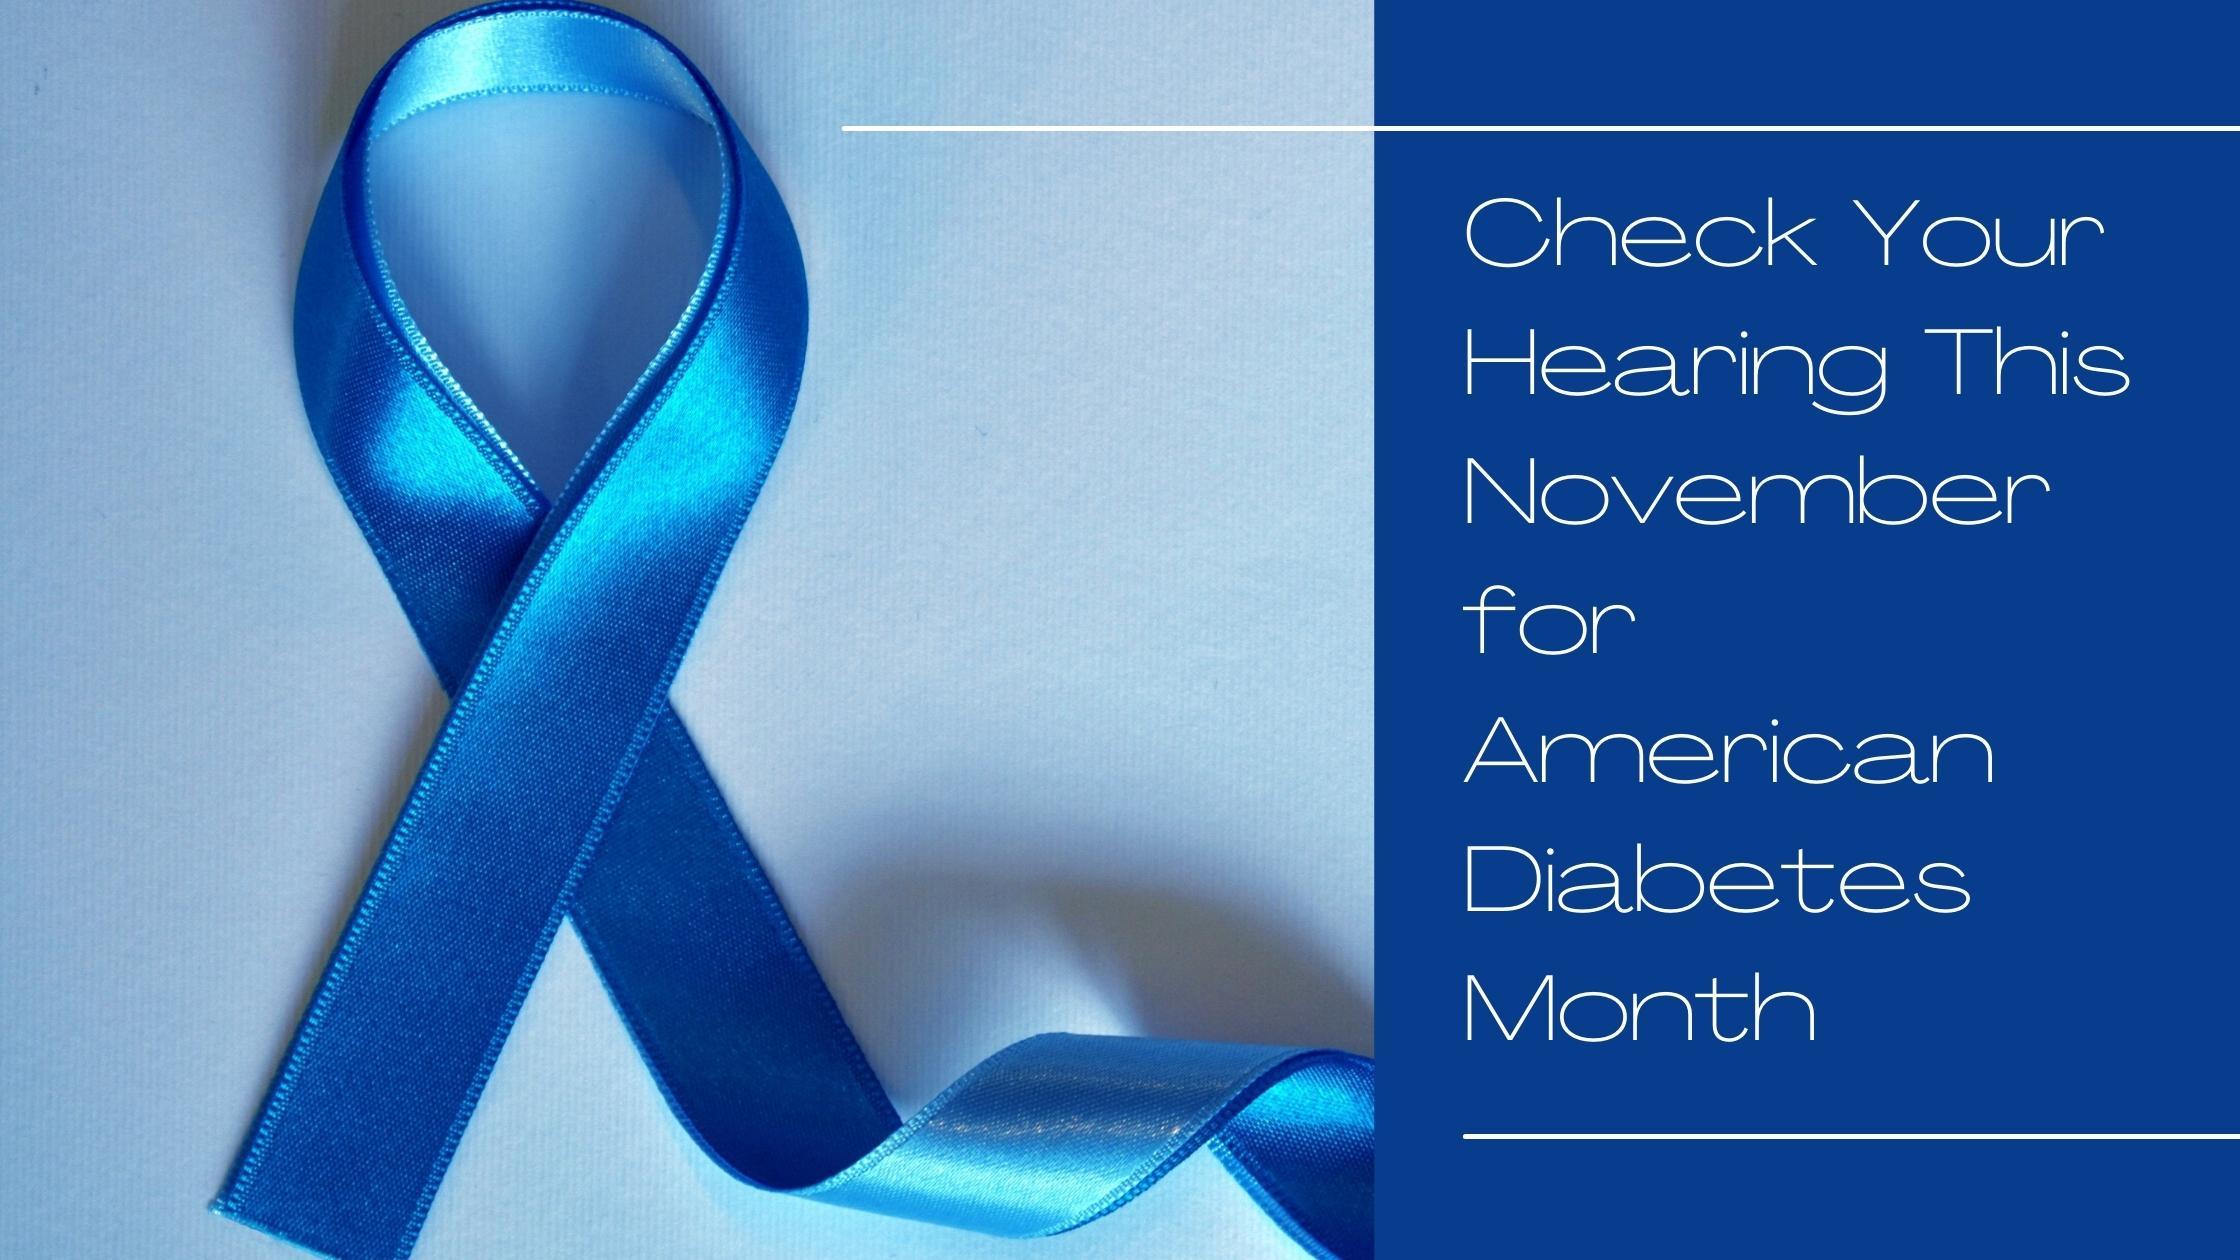 Check Your Hearing This November for American Diabetes Month